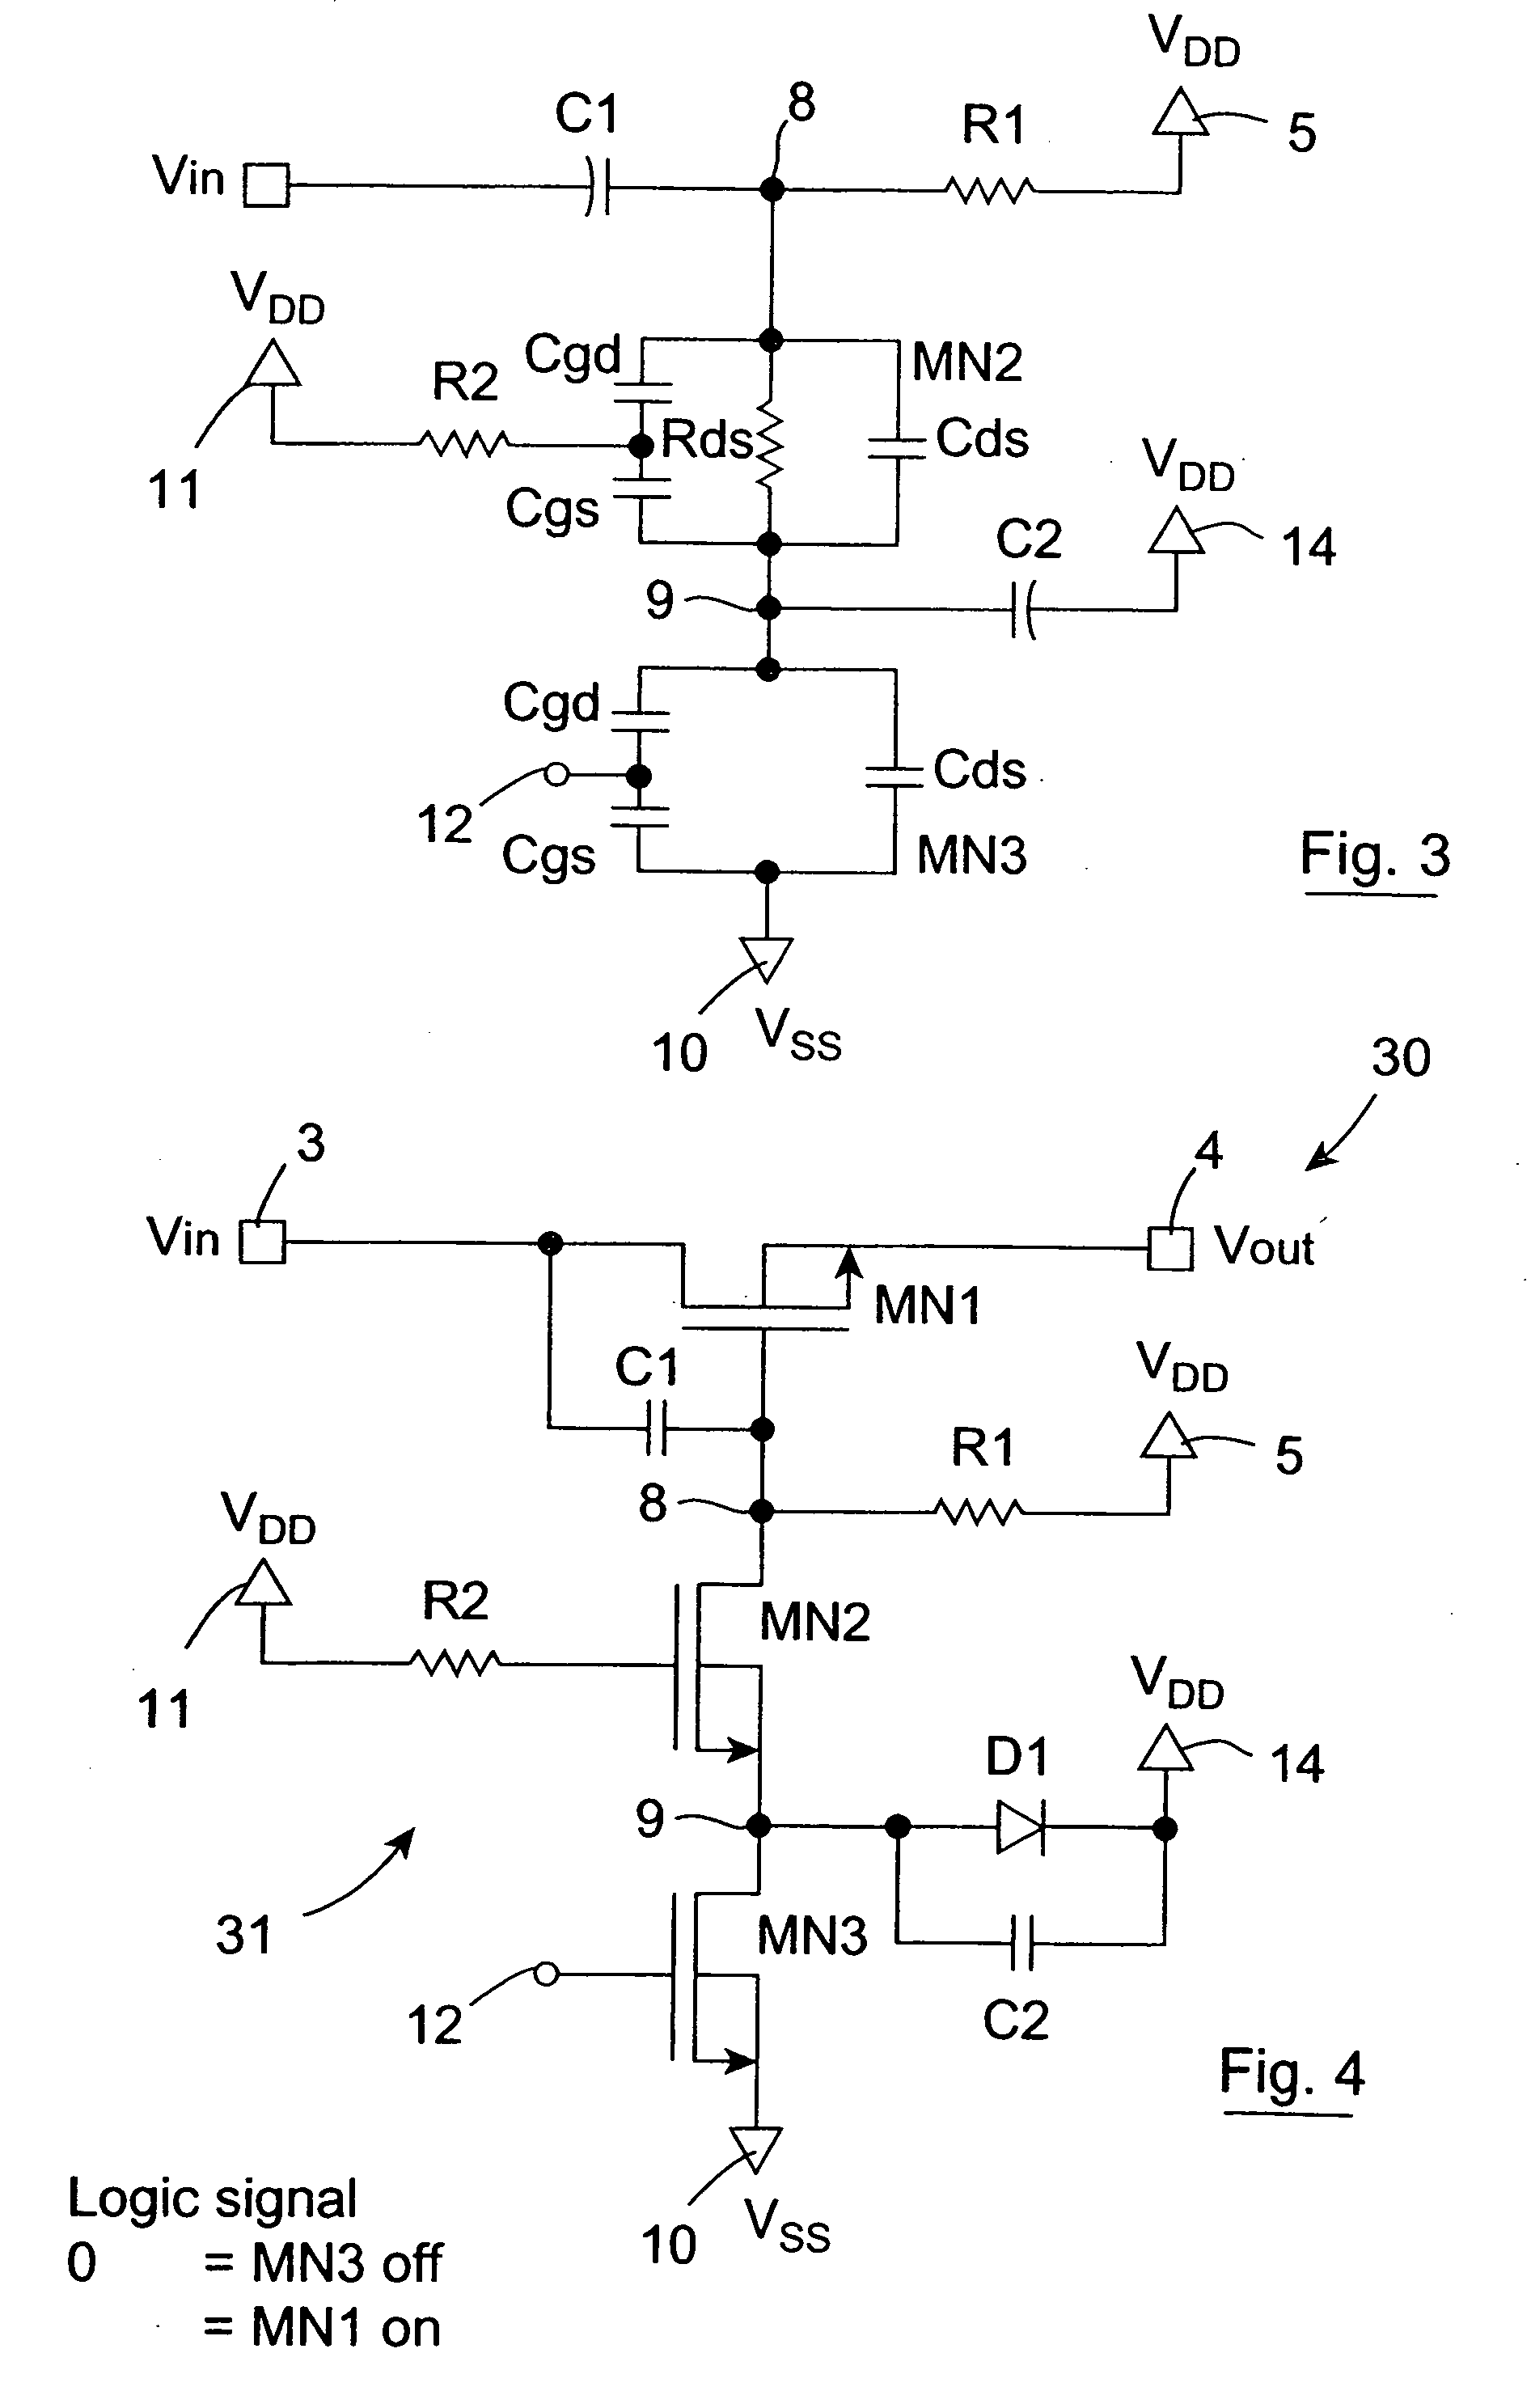 Open drain driver, and a switch comprising the open drain driver